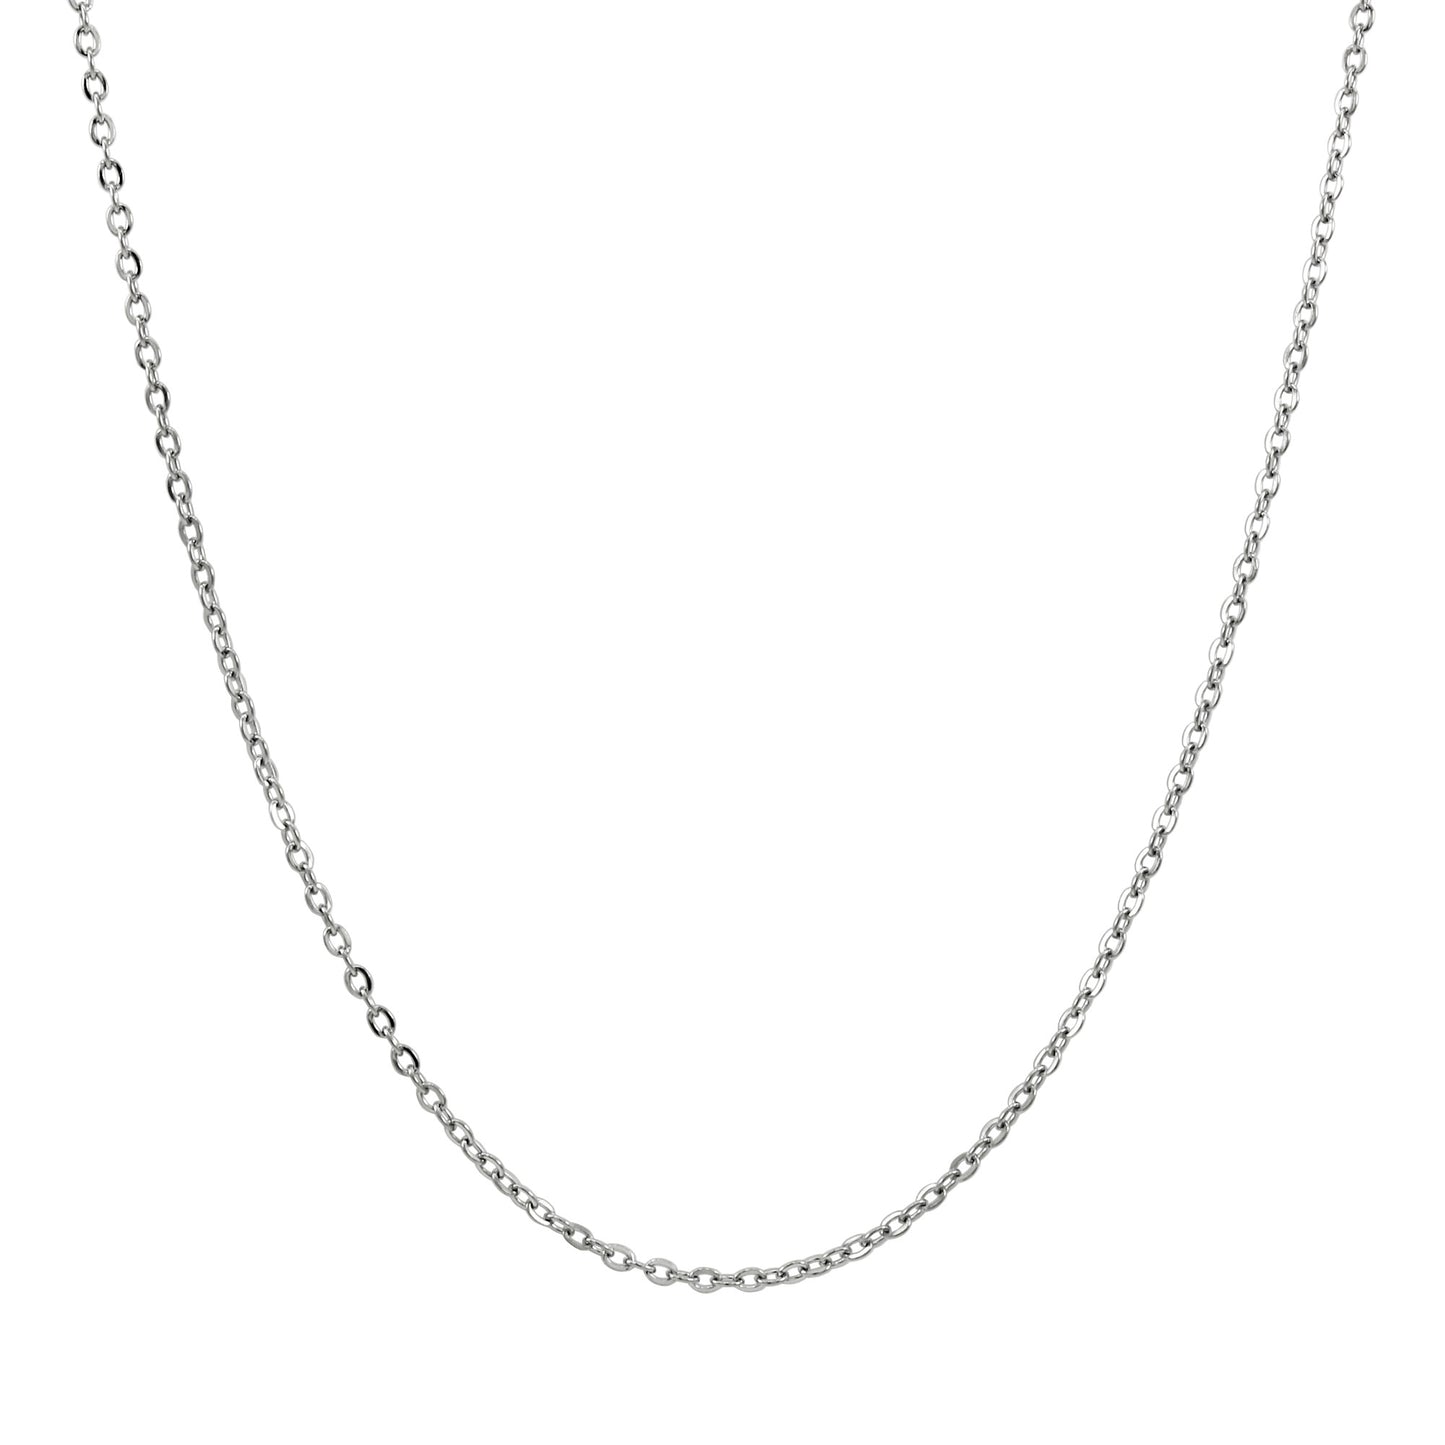 .925 Sterling Silver Kayak Necklace With 22" Hypoallergenic Cable Chain Necklace